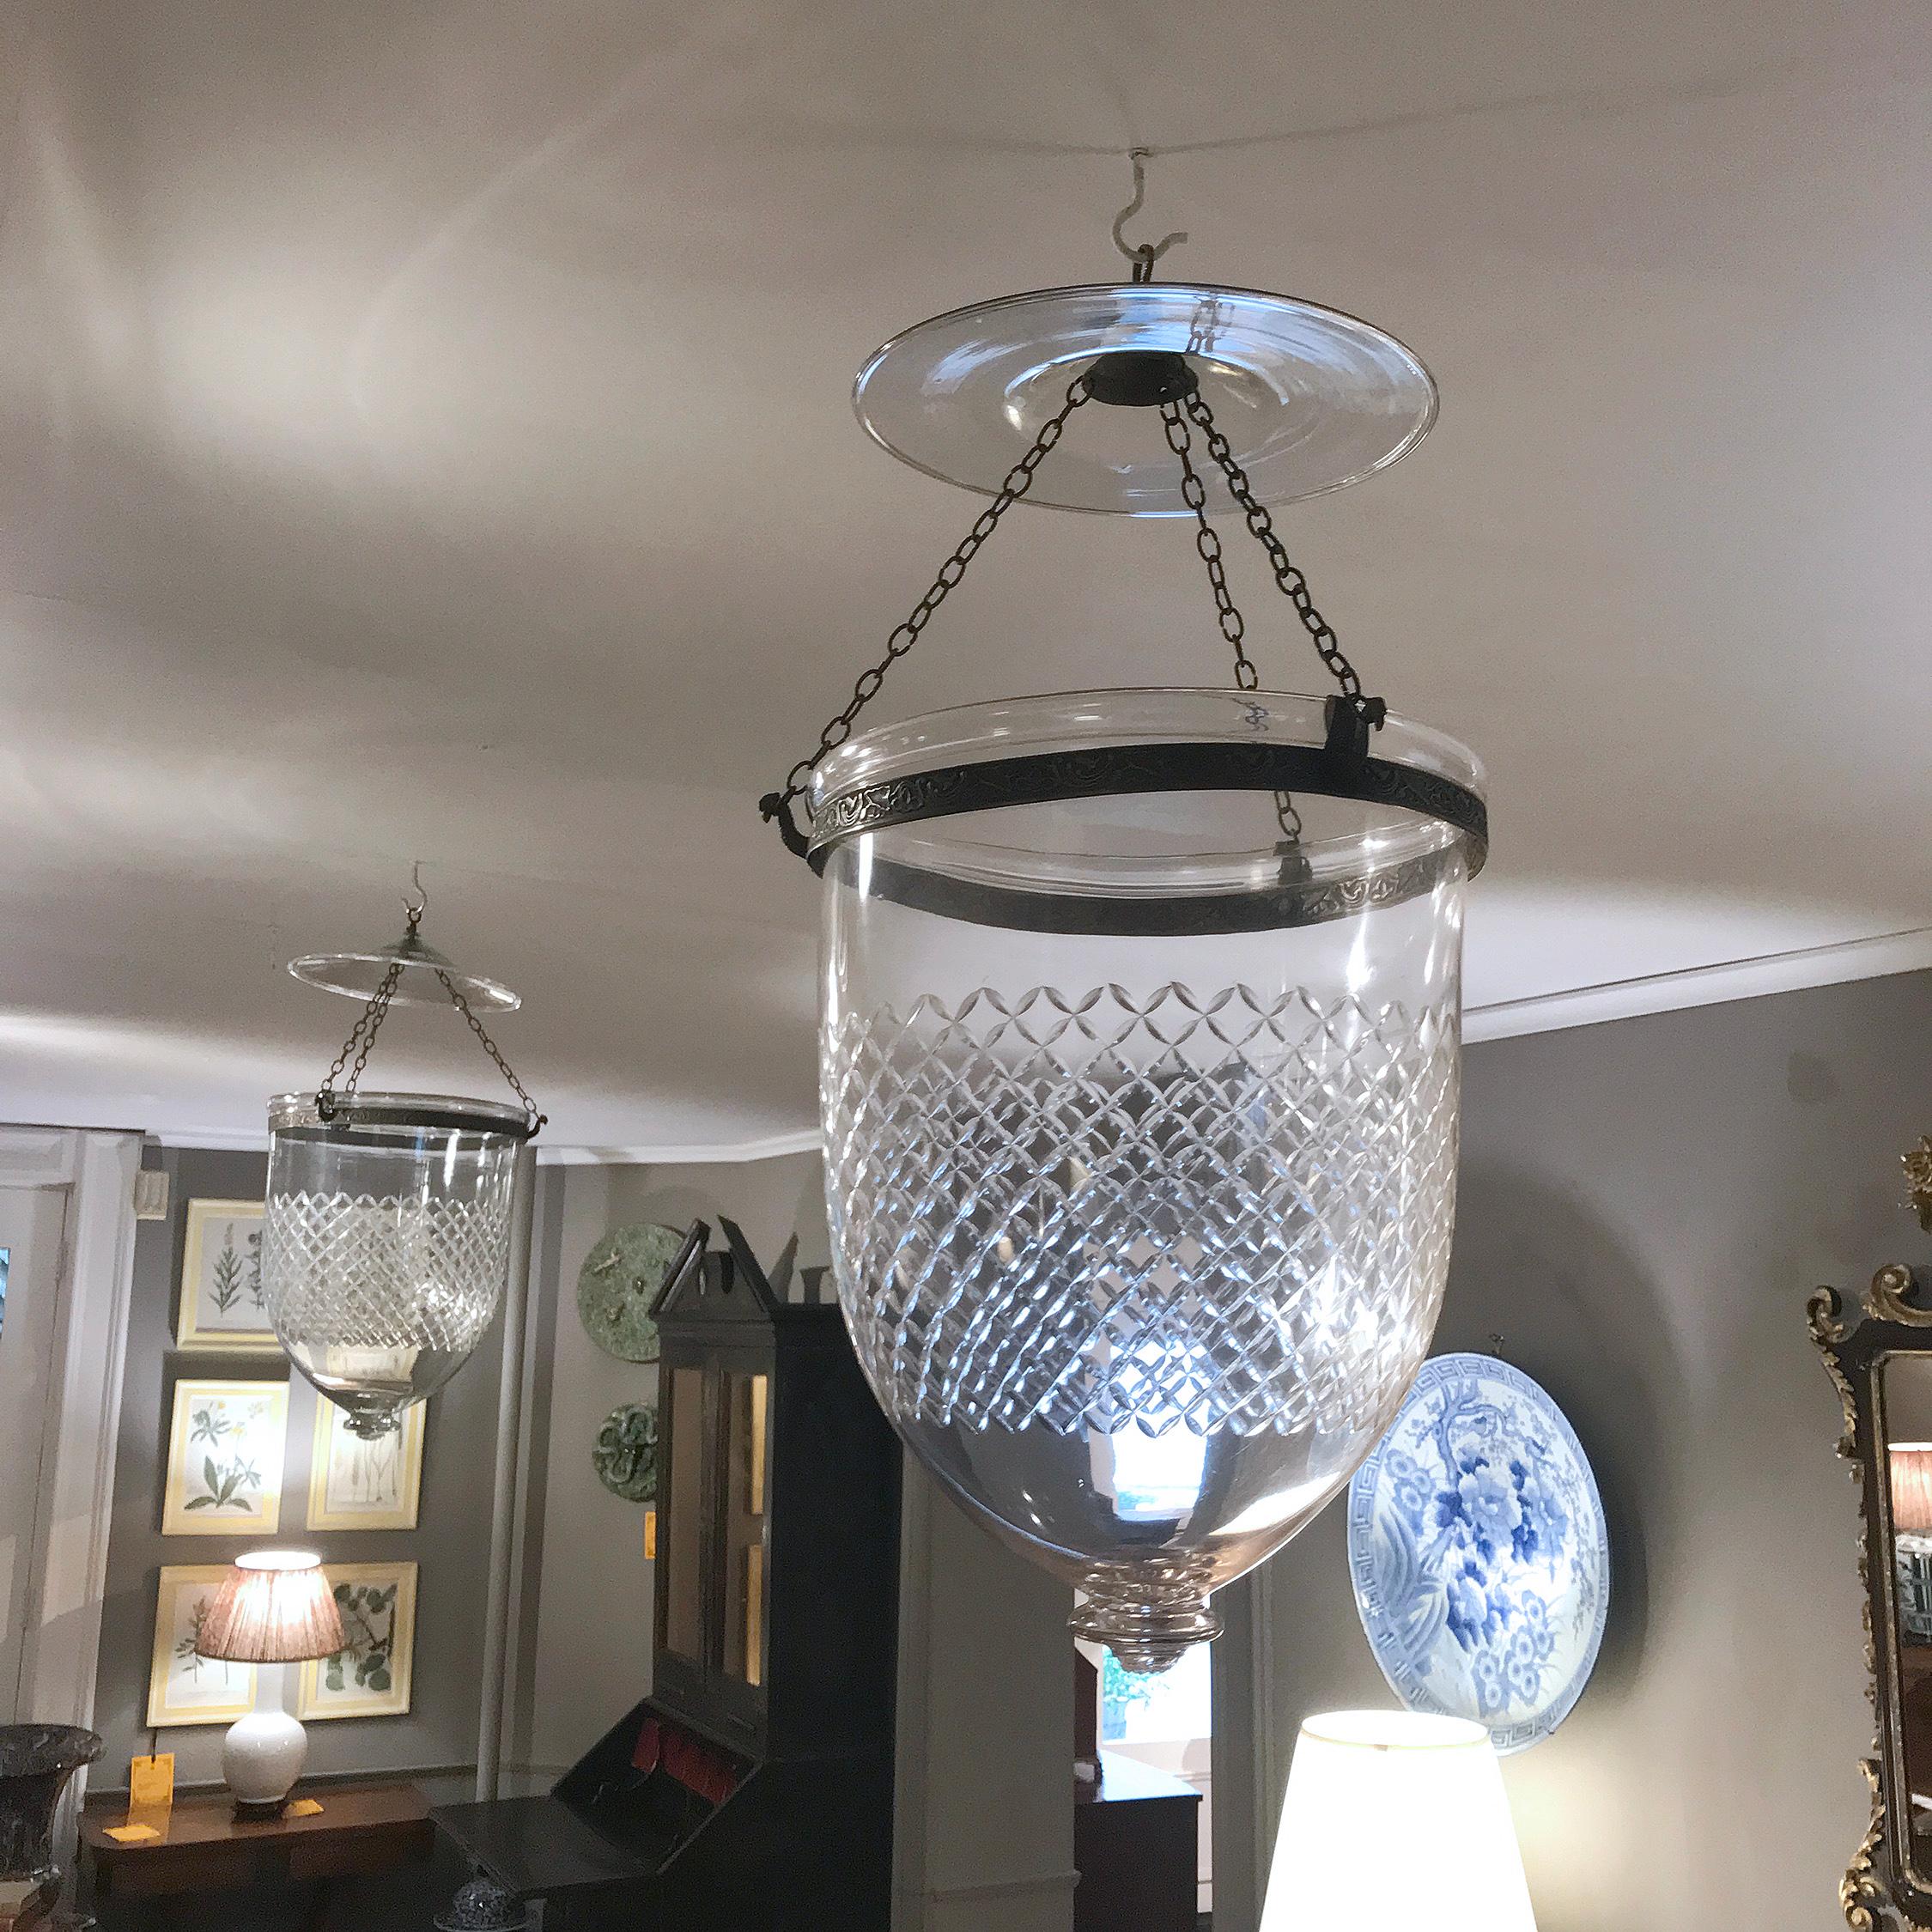 Each of these beautiful 19th century handblown glass bell jar lanterns is ornamented with an etched diamond motif. Three chains from the glass smoke bell and brass canopy attach to peacock-shaped hooks on the original rolled brass band, supporting